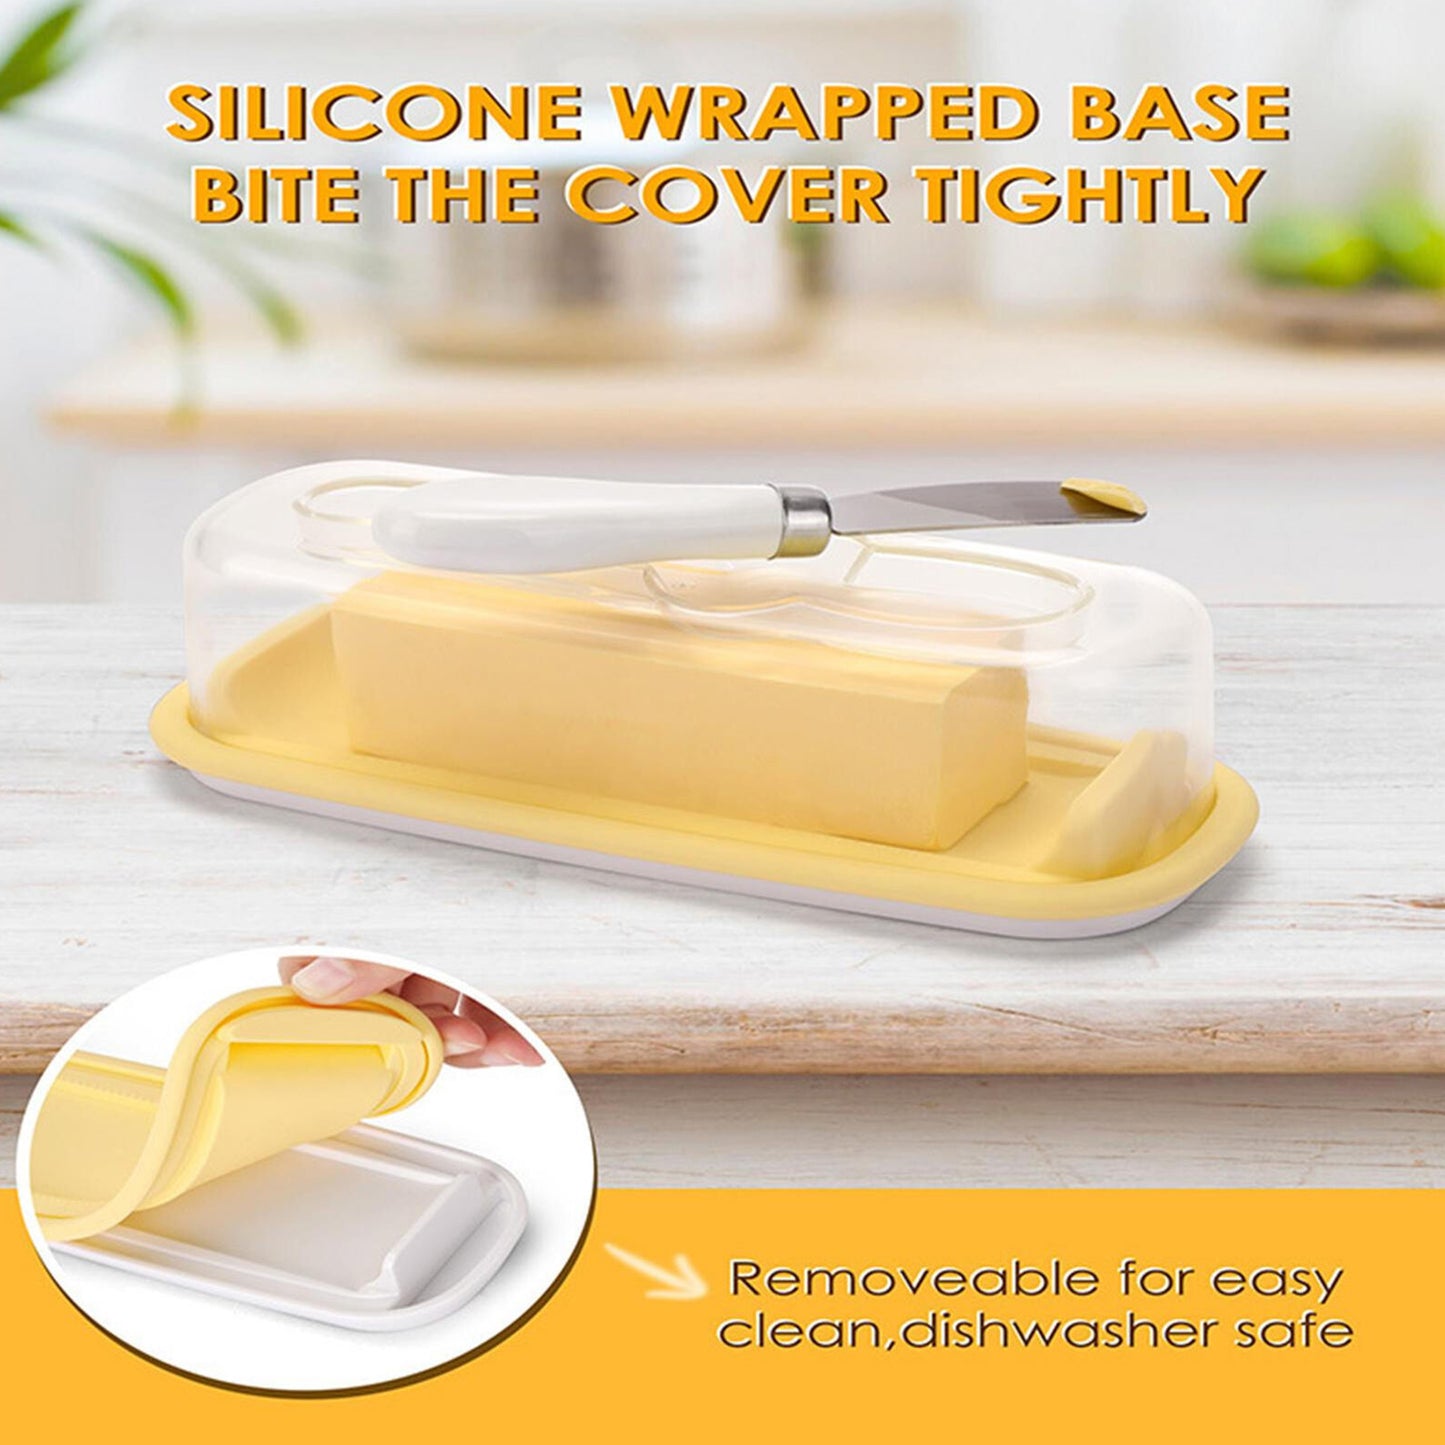 Airtight Butter Dish, Cheese Container with Knife